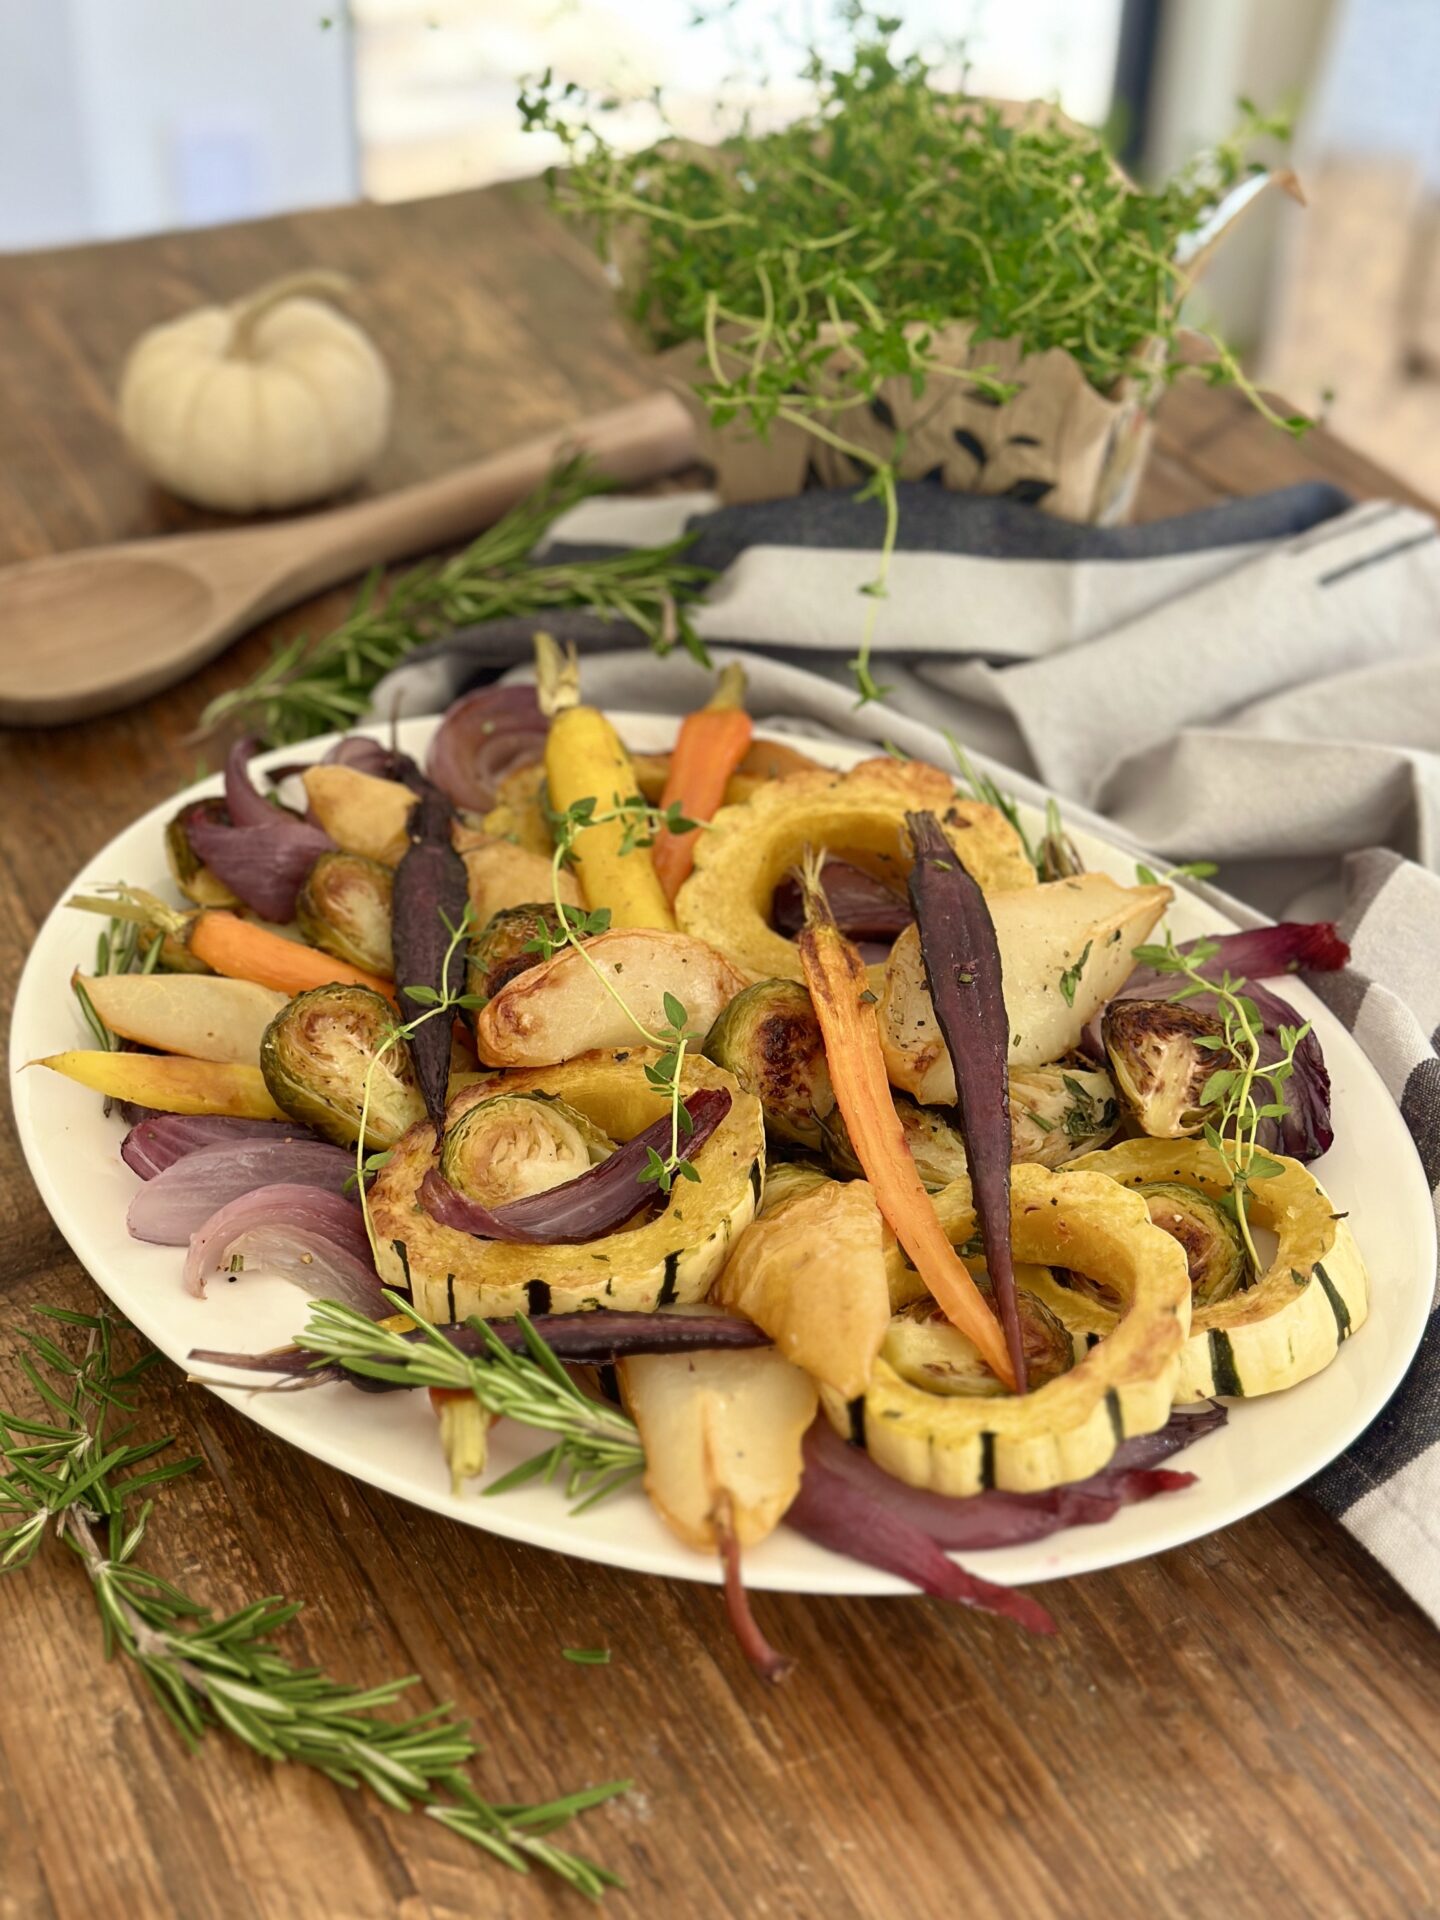 A Thanksgiving side dish of Maple Butter Roasted Vegetables with Pears sits on a wood table, surrounded by fresh herbs